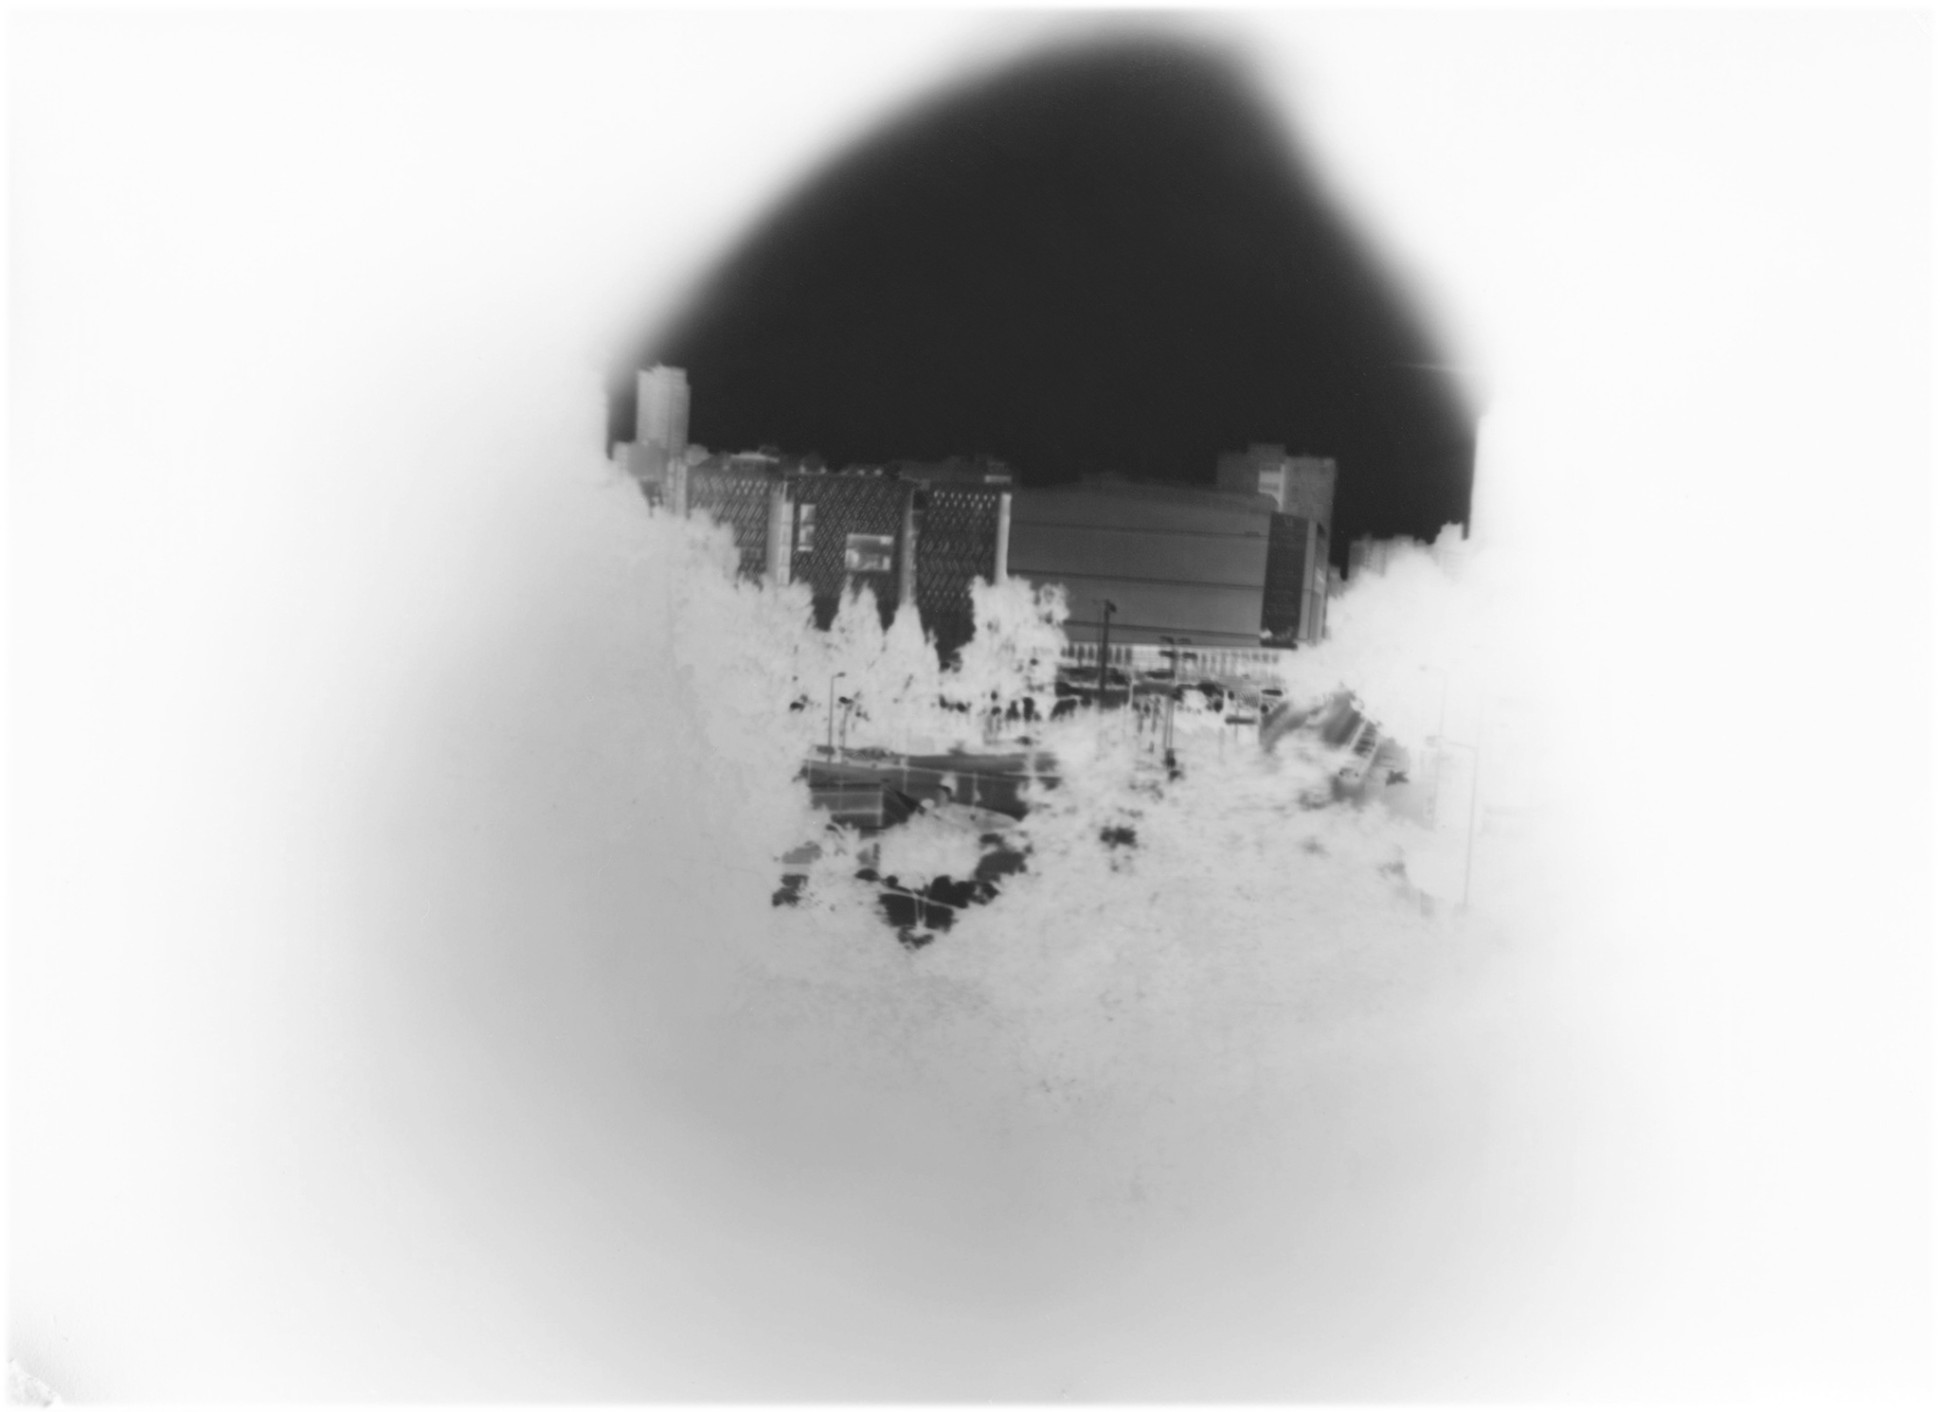 Lamia Joreige Views of Museum Square 11, 2013 Black and white photogram 12.7 x 17.8 cm. / 5 x 7 in.